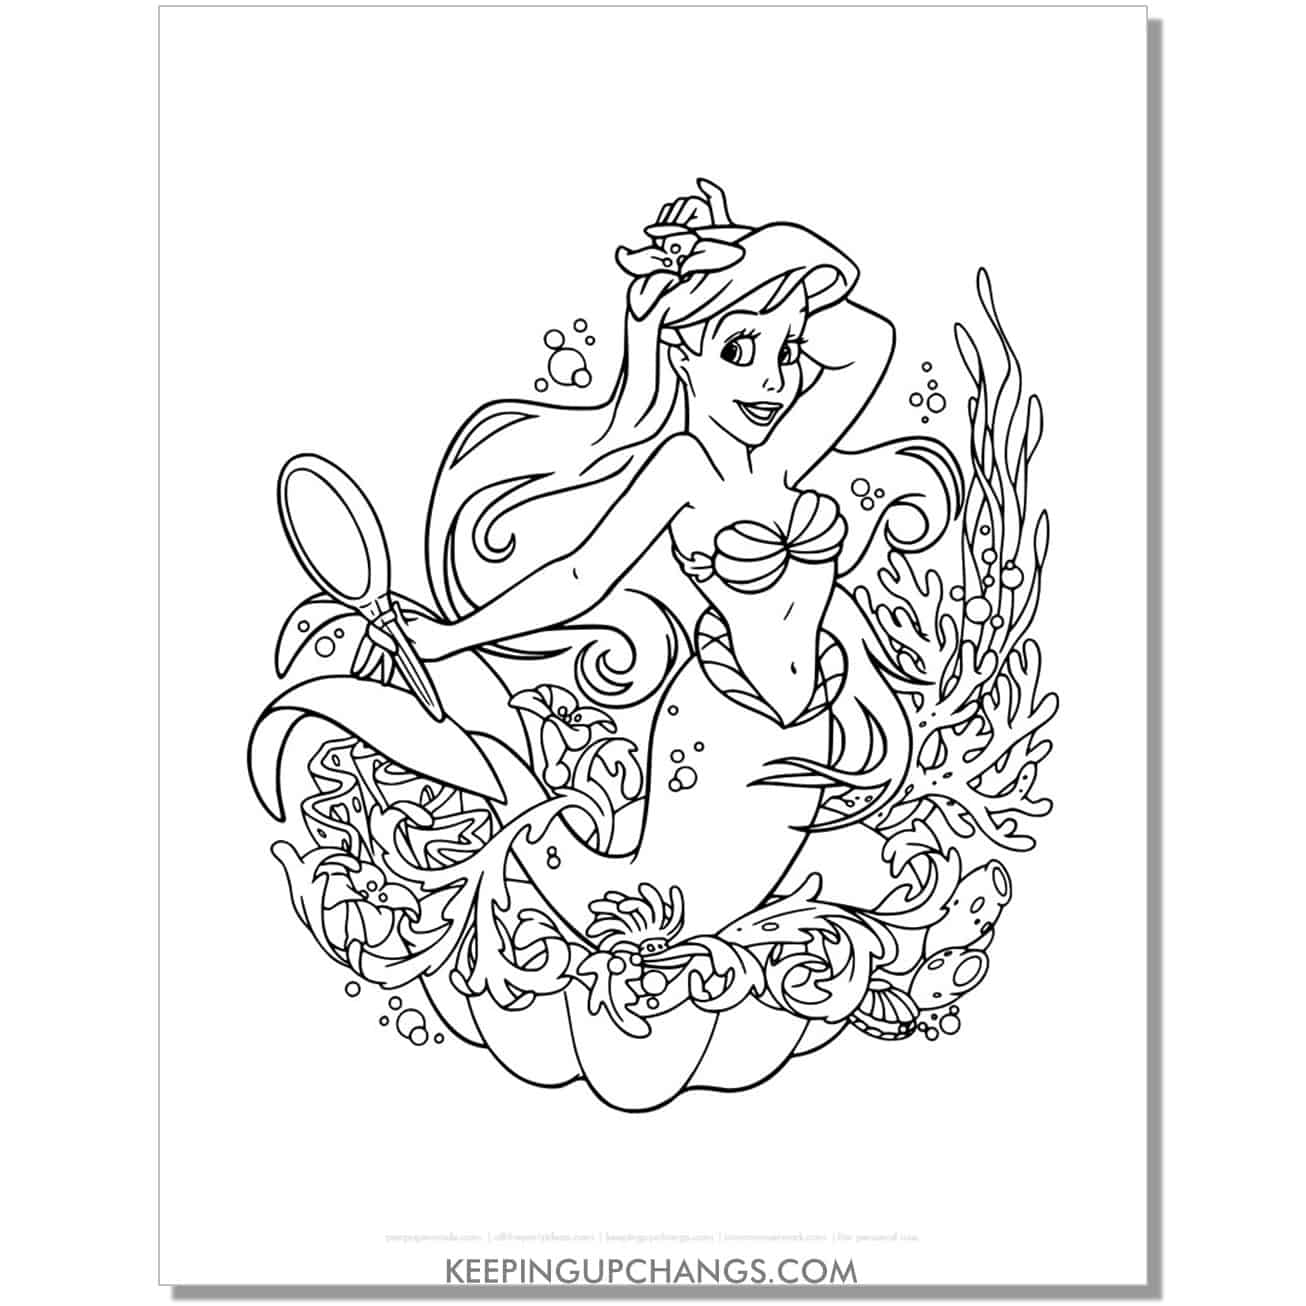 little mermaid ariel with mirror in clamshell coloring page, sheet.